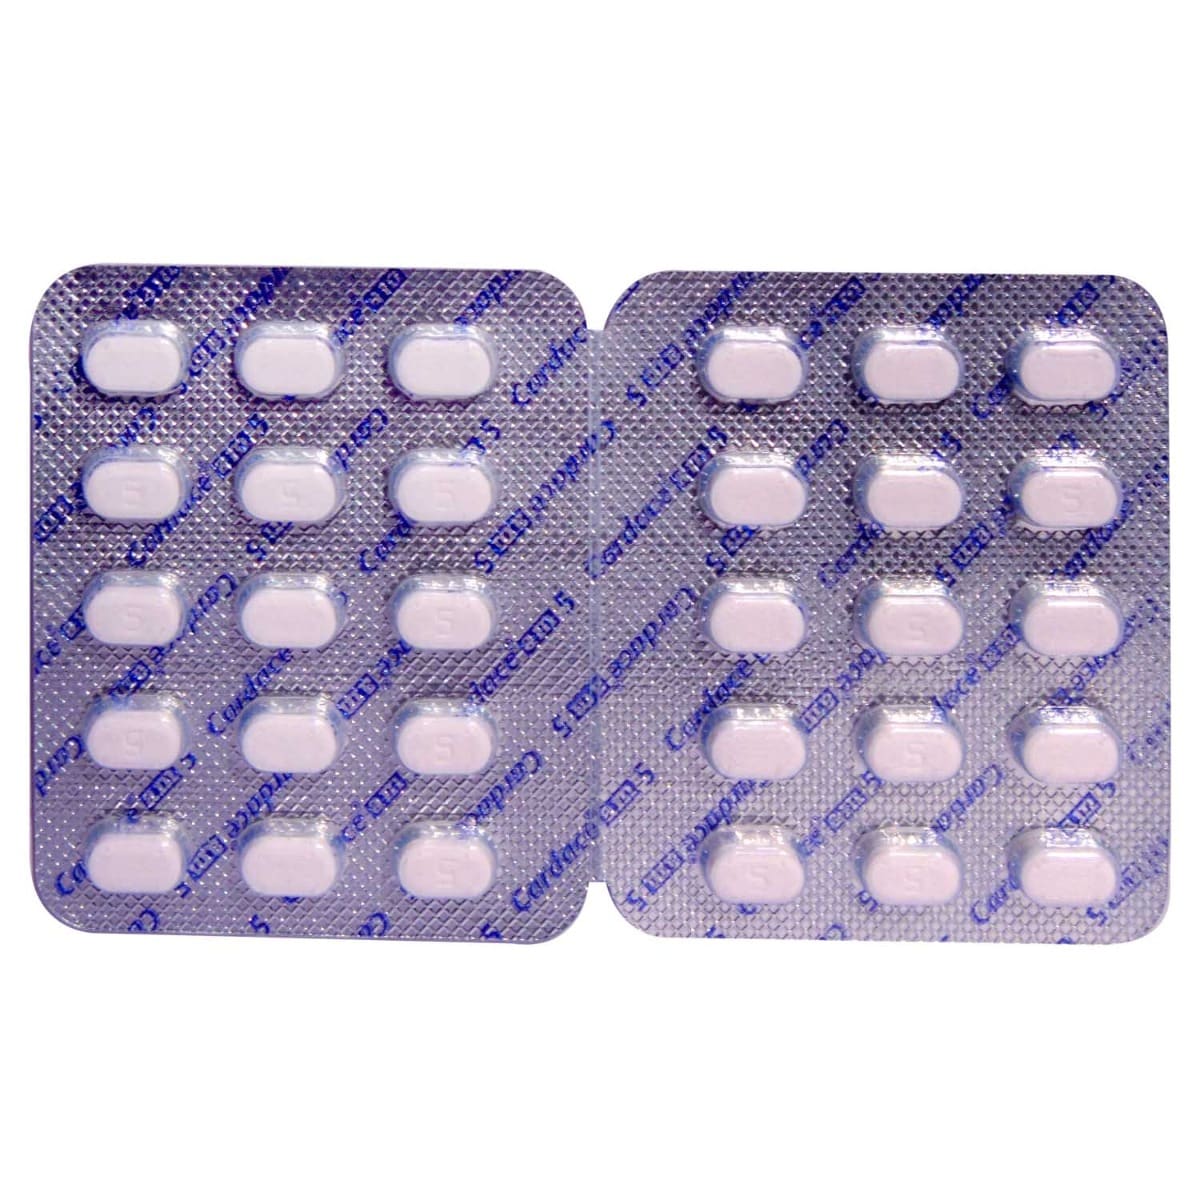 Cardace AM 5 Tablet 15's, Pack of 15 TabletS